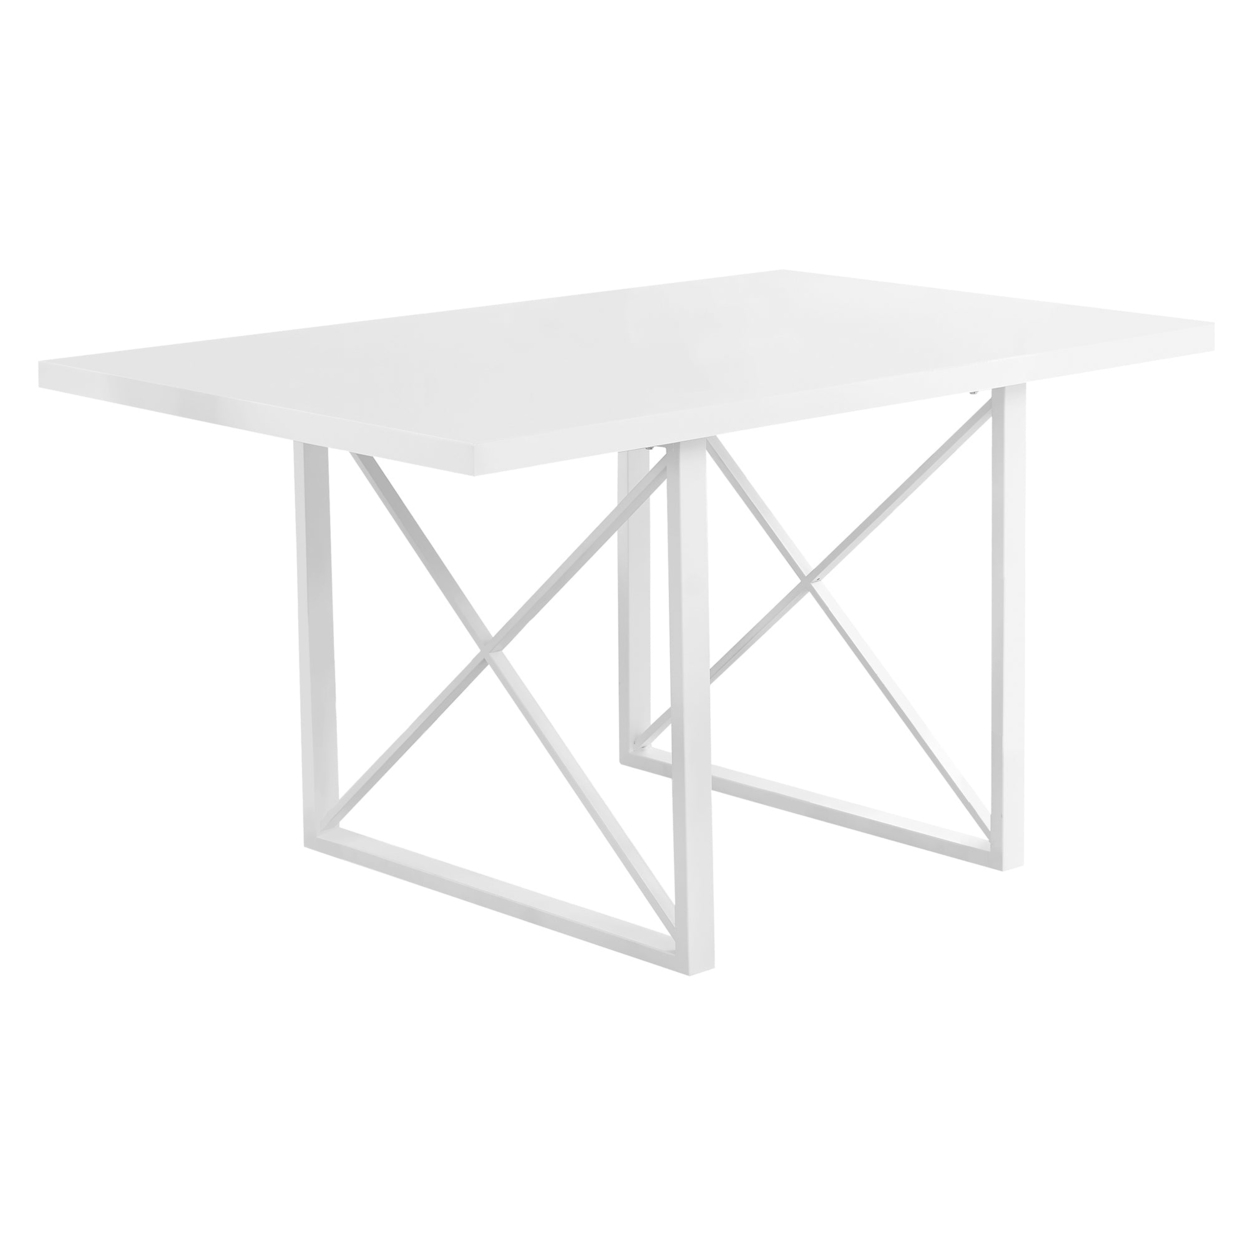 36" x 60" x 30" White HollowCore Particle Board Metal Dining Table